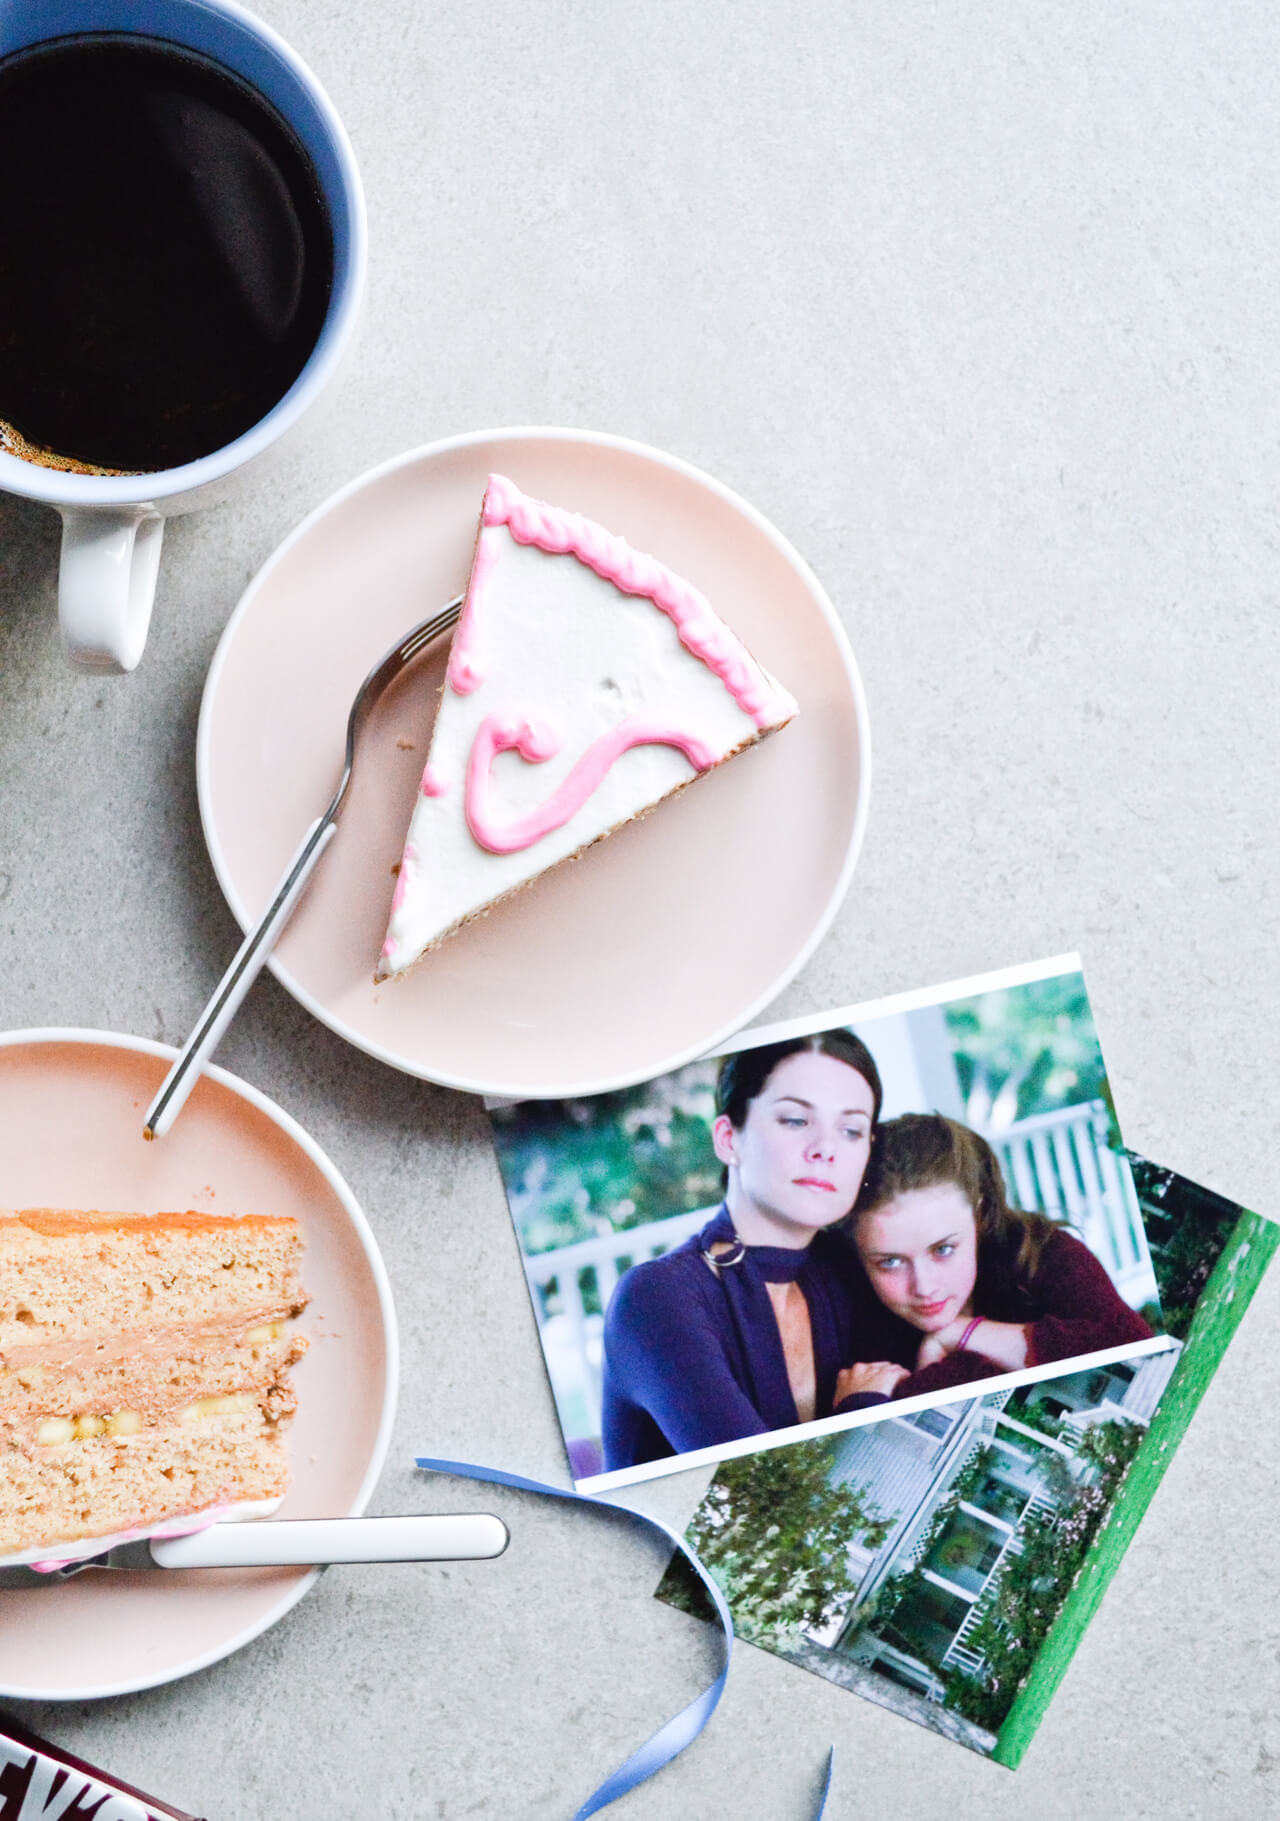 Gilmore girls recipe project on Mitzy At Home blog! From first to last season, get the recap for every episode followed by a recipe from that episode! Everything from coffee to Lorelai and Rory's favorites to Sookie's menu and stuff Luke and Emily thought of. Let's have FUN!